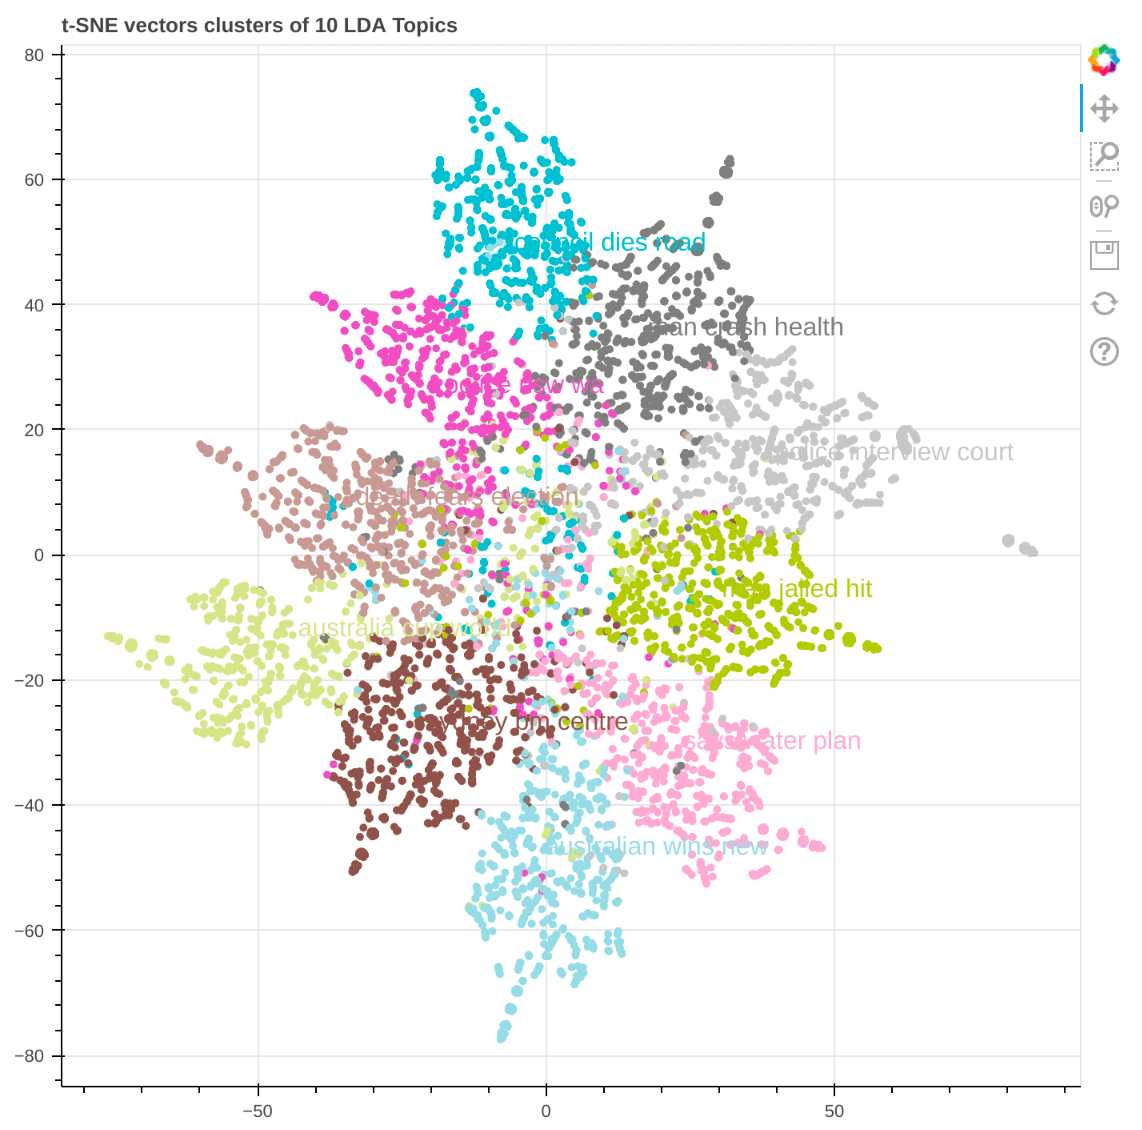 Visualizing 10 topic clusters after applying t-SNE algorithm on the output of LDA algorithm